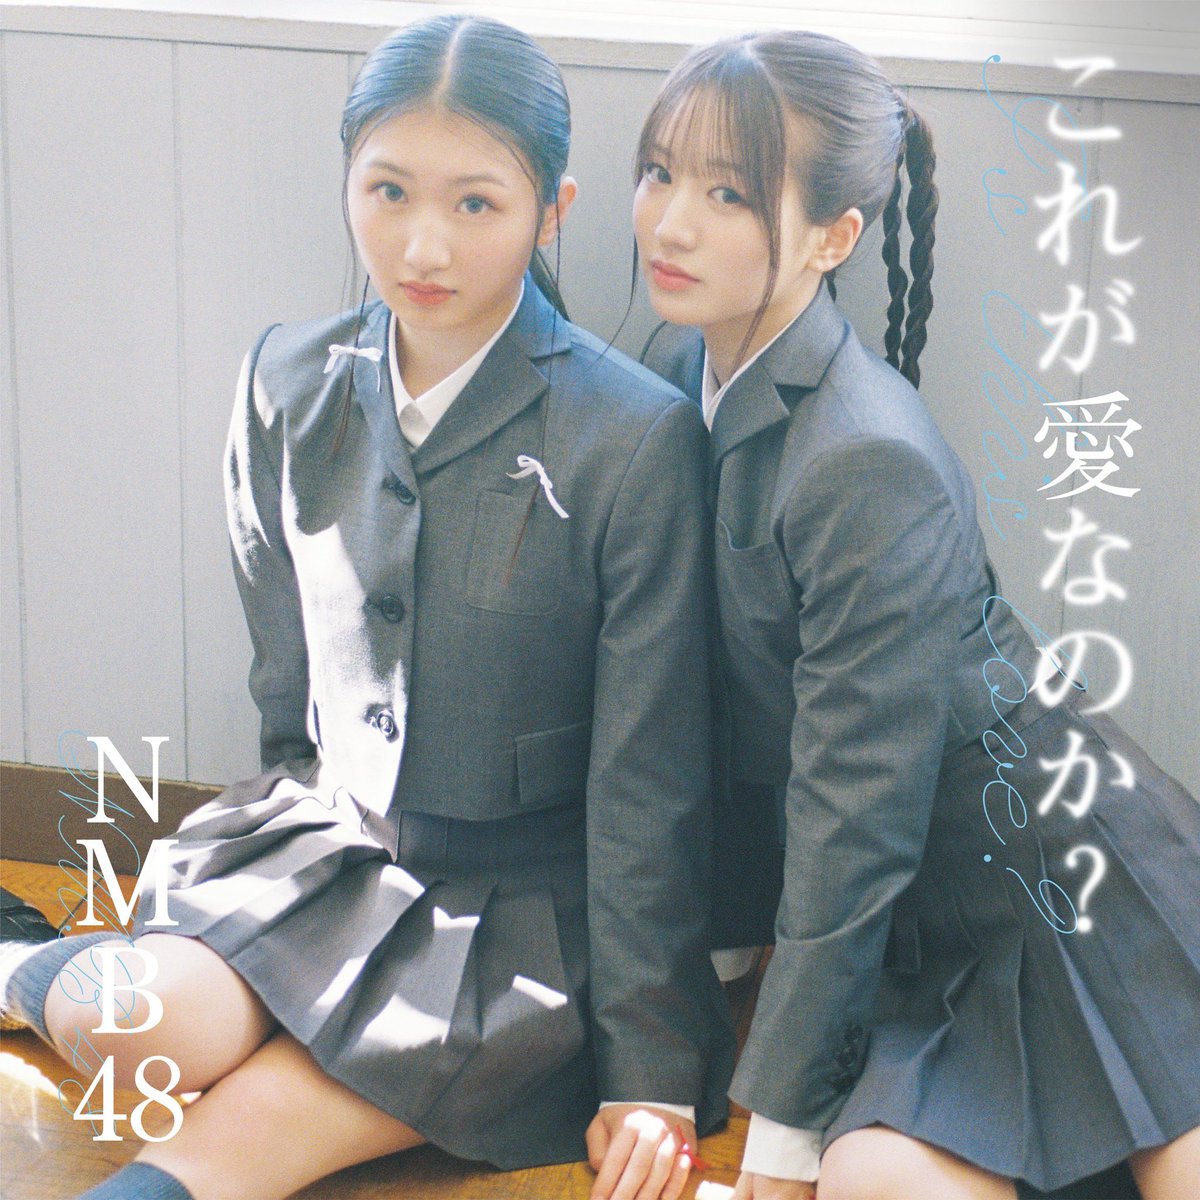 nmb48_official tweet picture